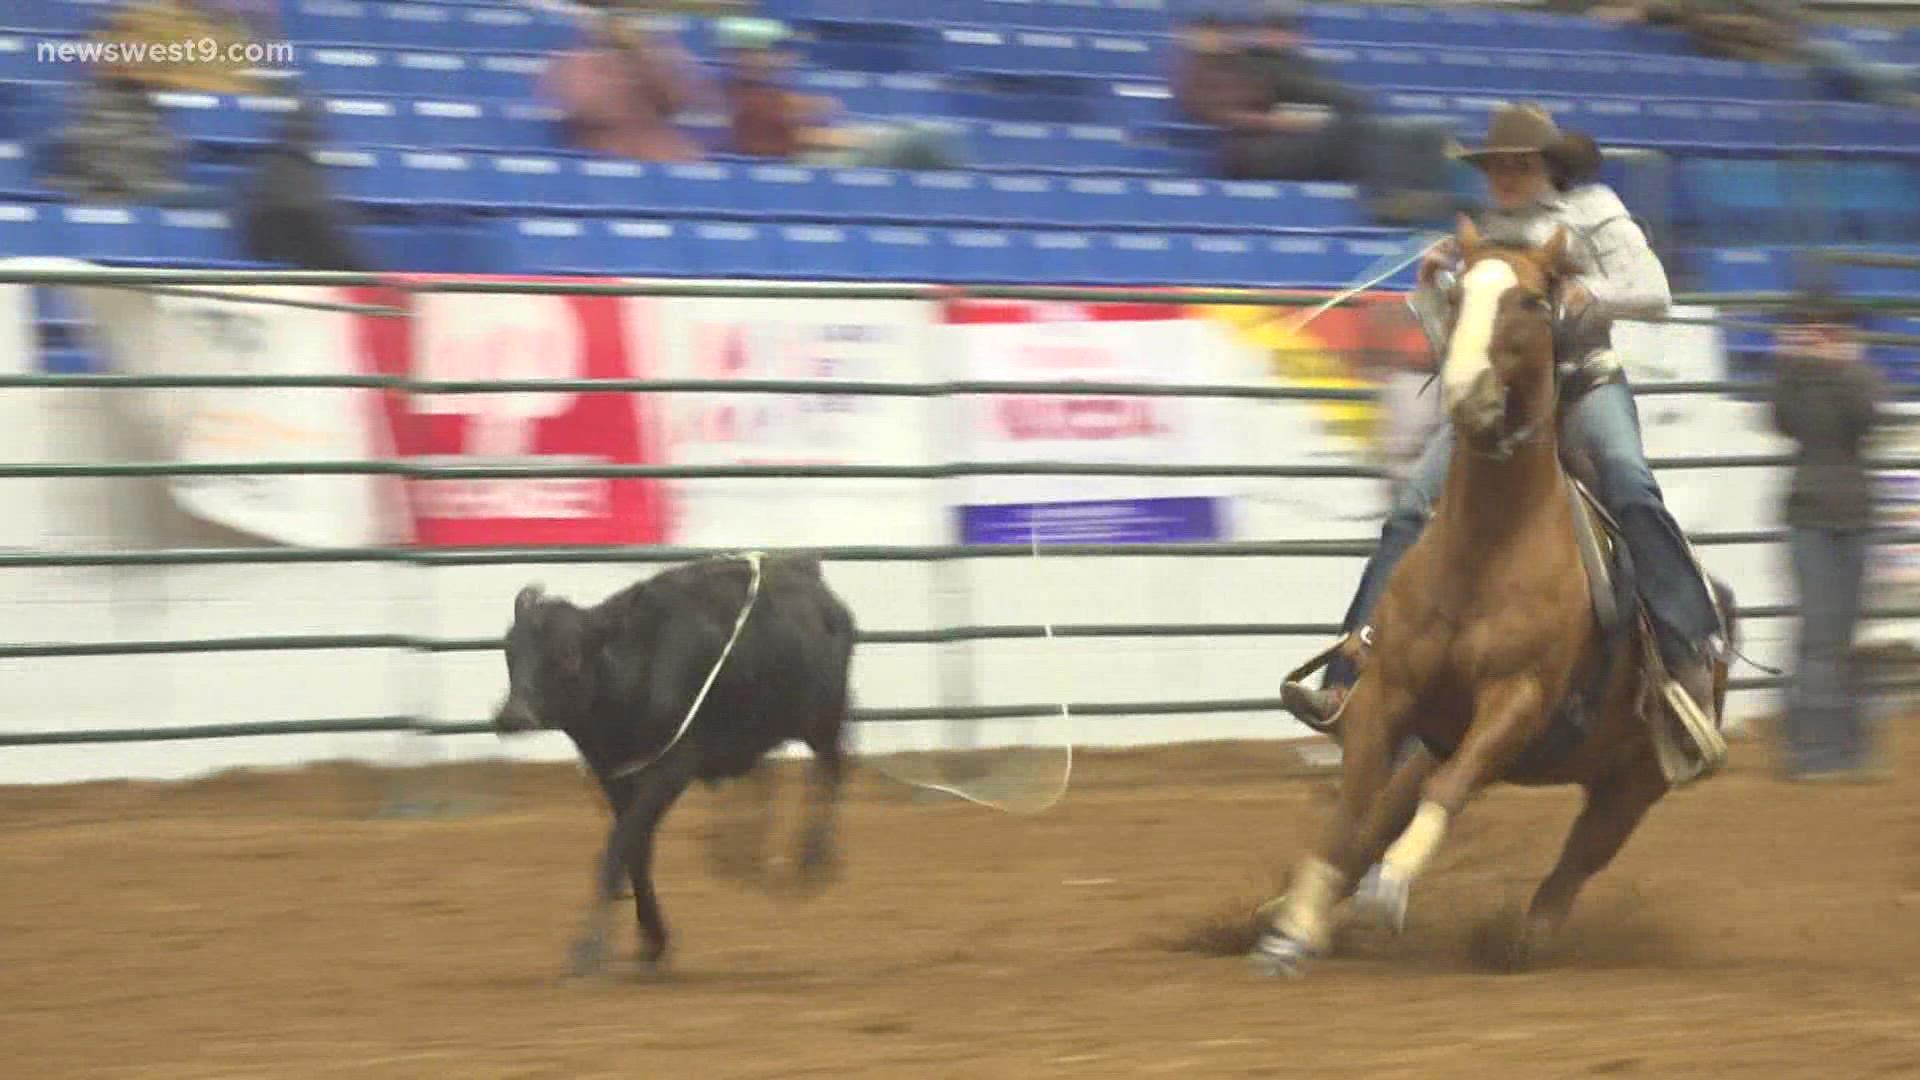 Women ropers will now get a chance to showcase the sport at RODEOHOUSTON for the first time in March 2022.